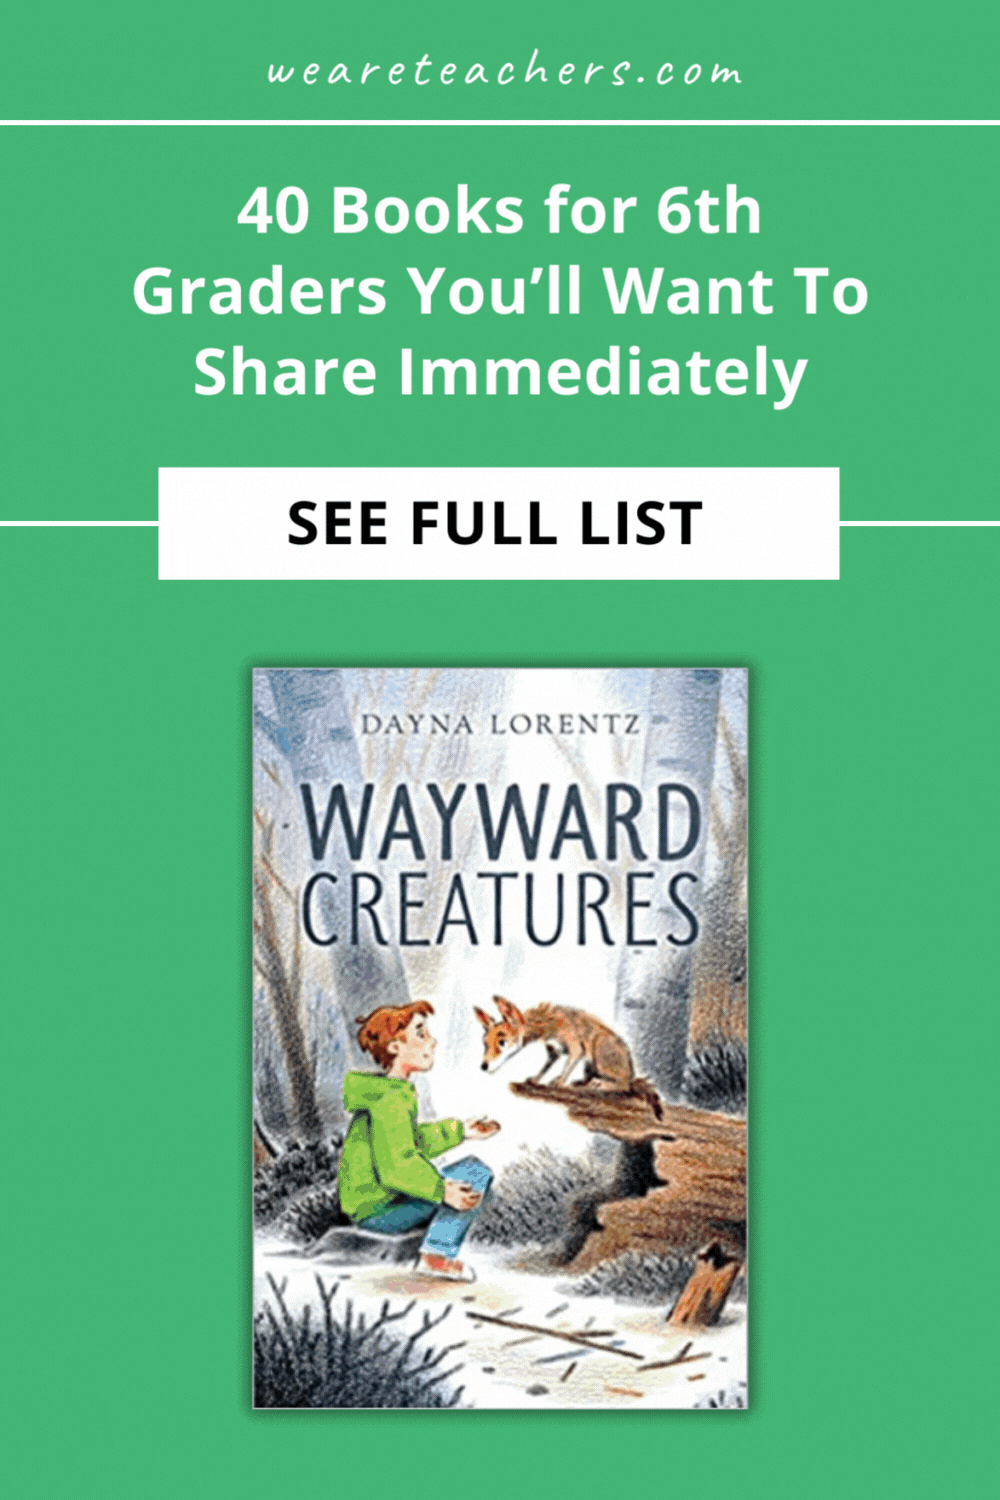 Add some amazing new books to your library with this list of new books for 6th graders. We've got something for every reader!